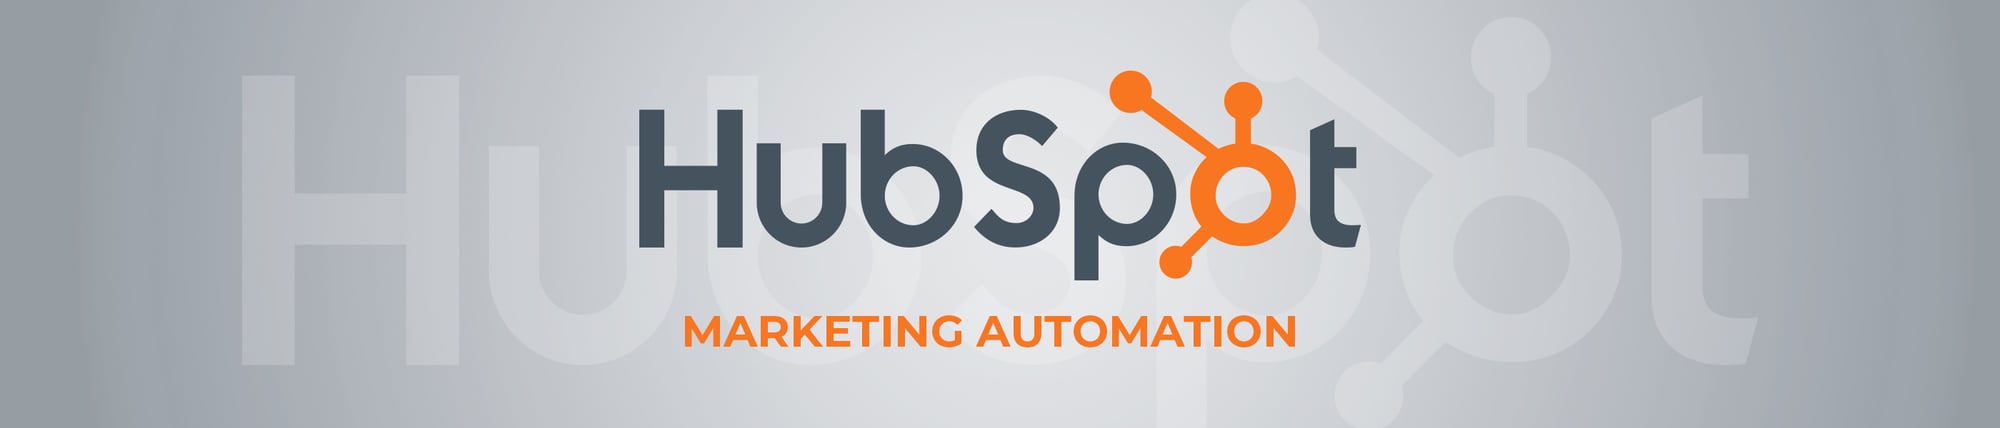 230530_W4_Header_Image_Product_Page_Hubspot